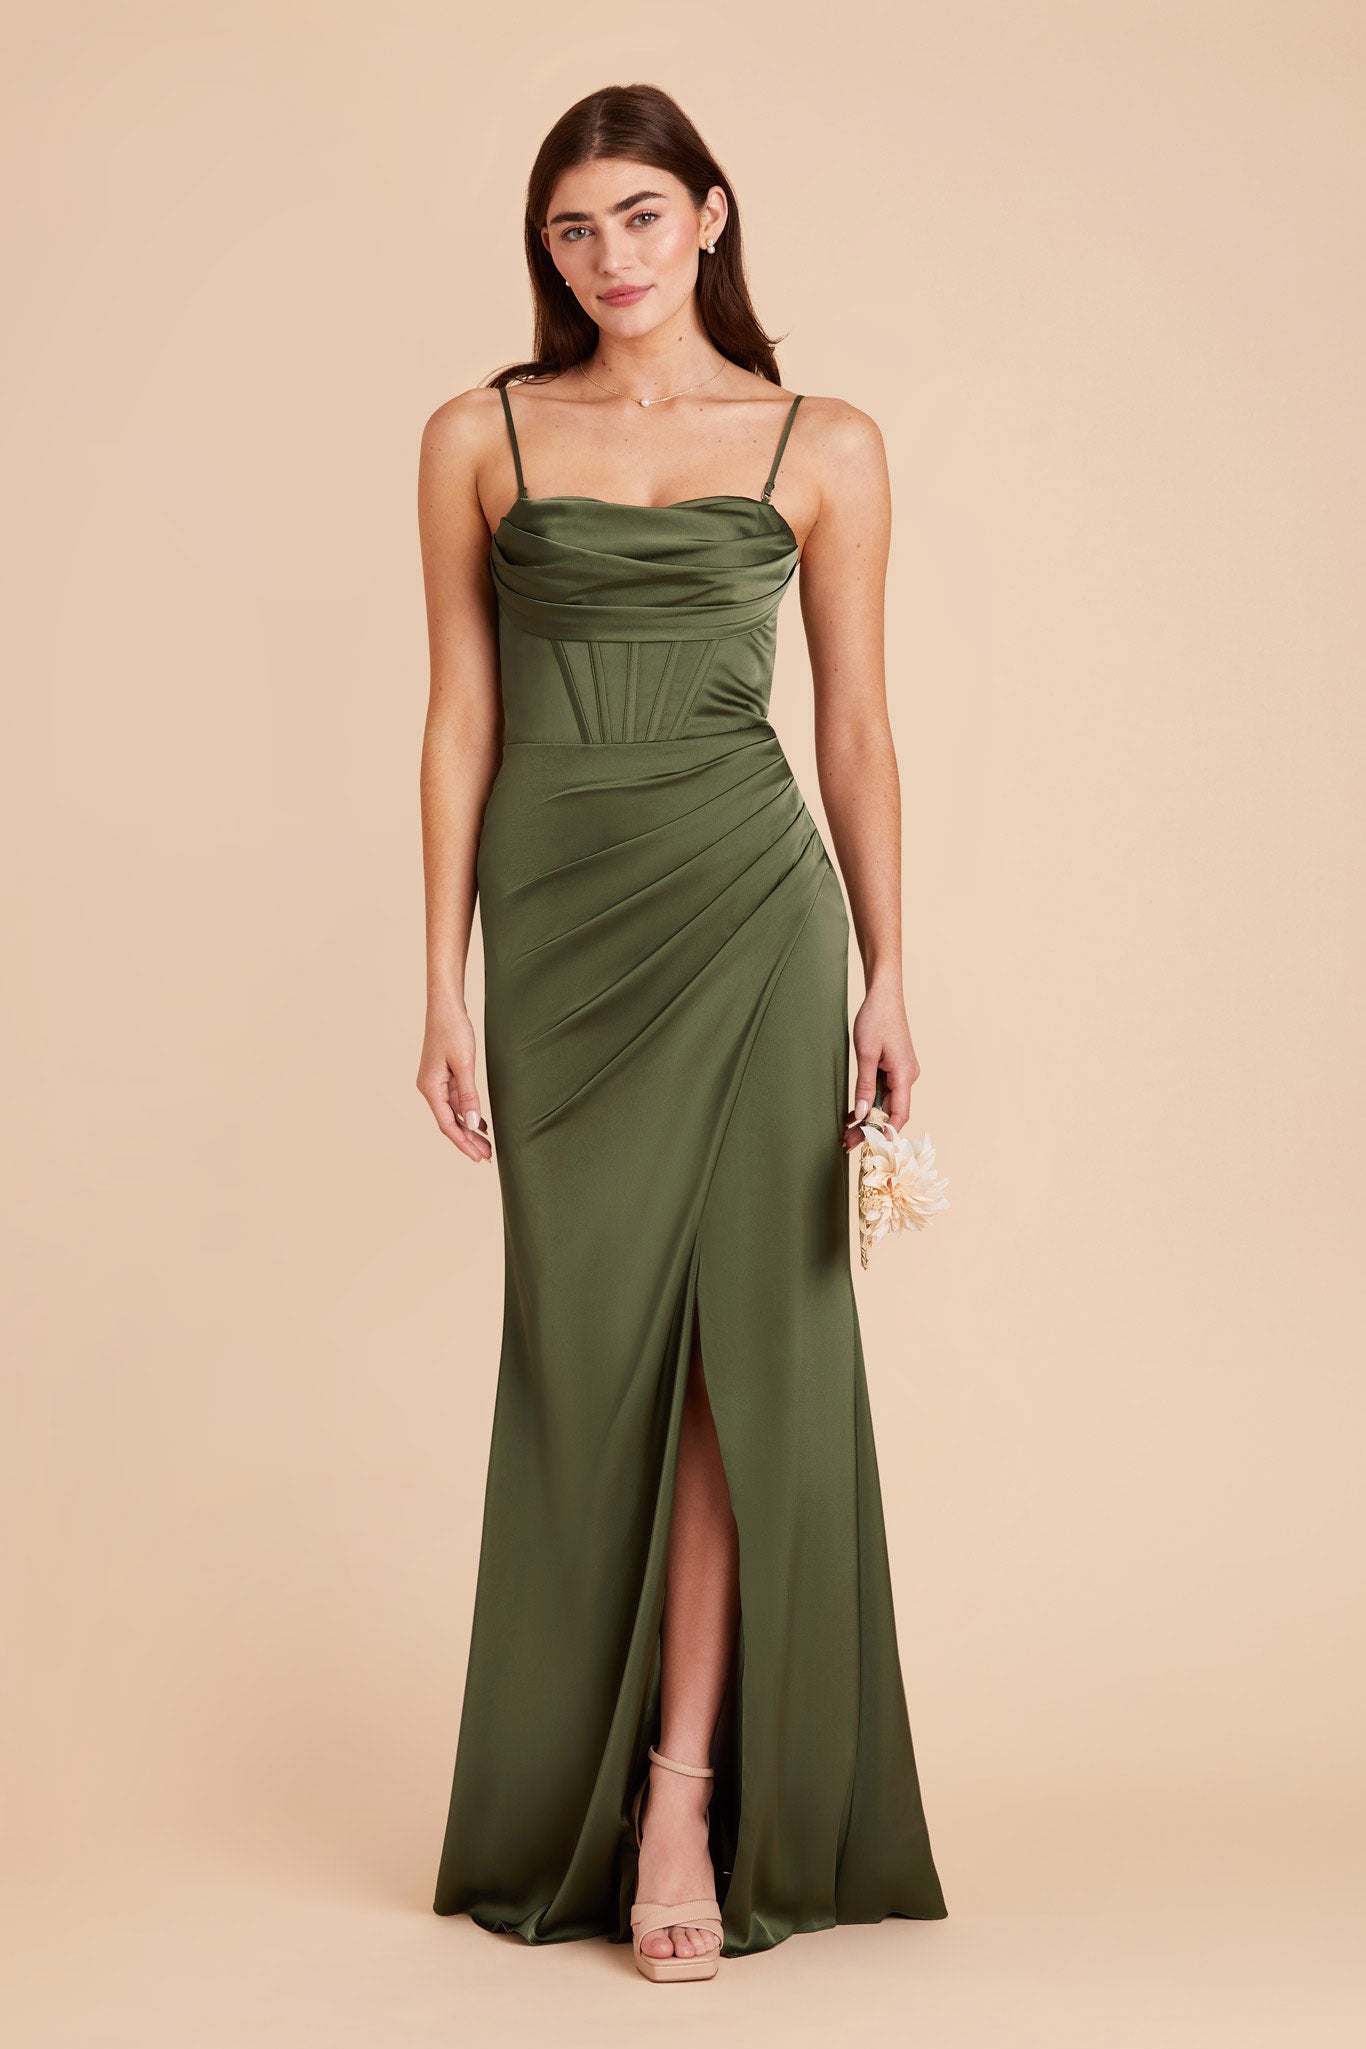 Olive Carrie Matte Satin Dress by Birdy Grey